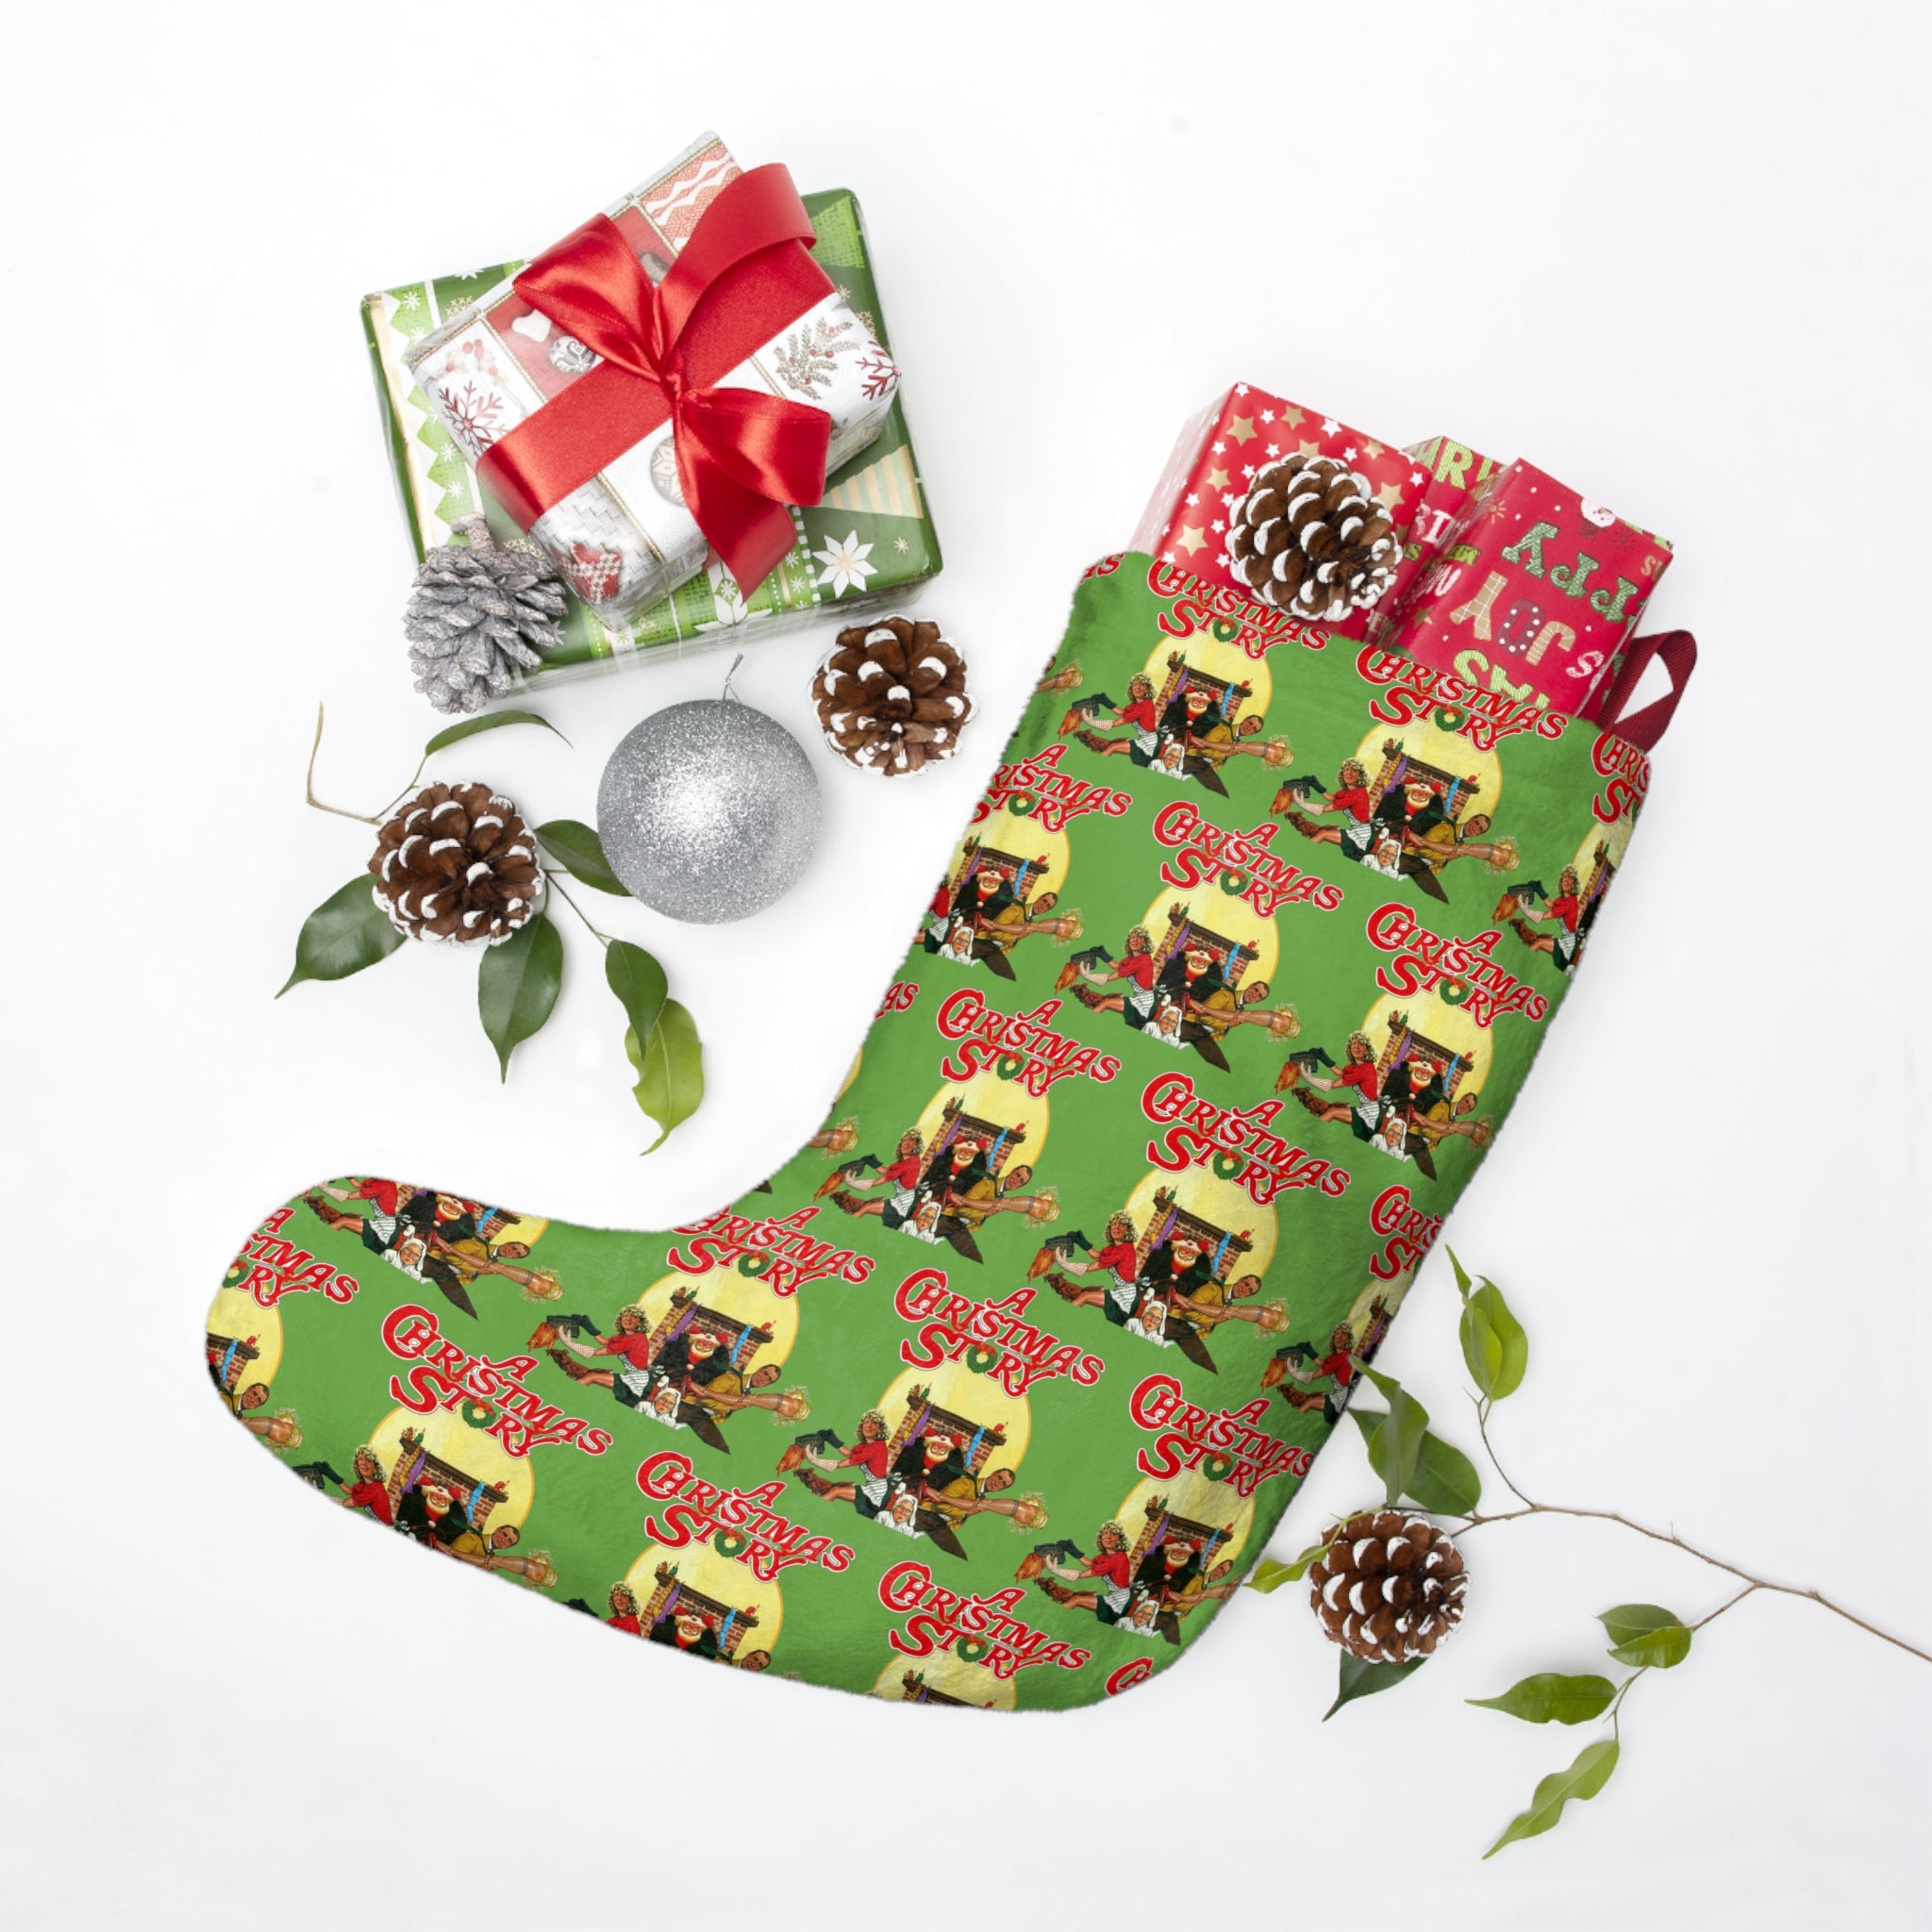 https://creationsbychrisandcarlos.store/products/a-christmas-story-christmas-stocking